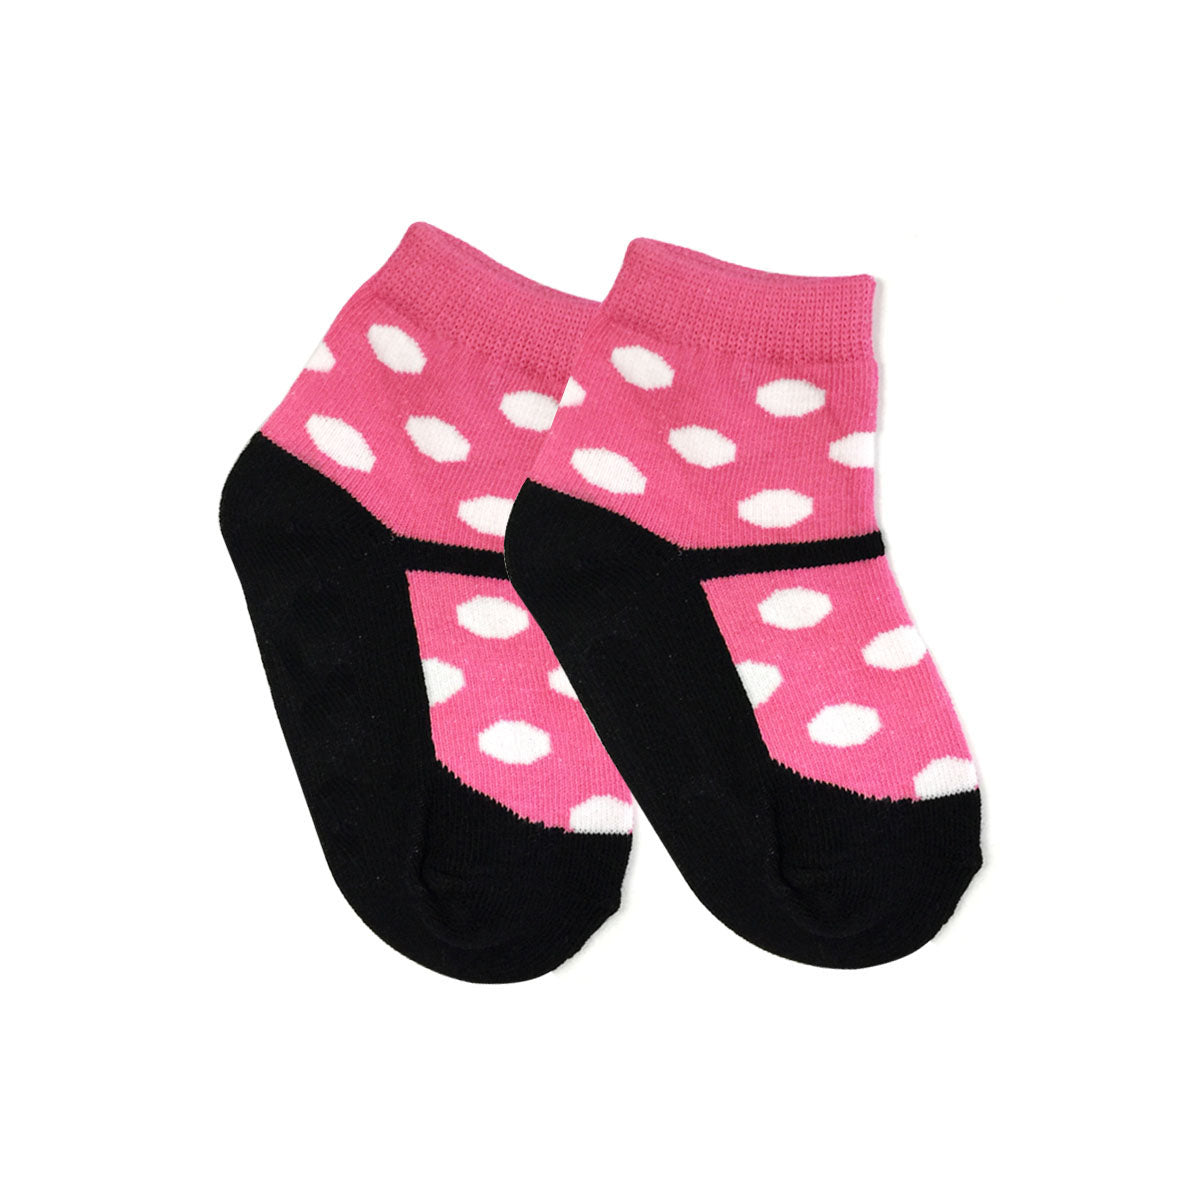 Wrapables Non-Slip Cute Mary Jane Socks for Baby (Set of 4)